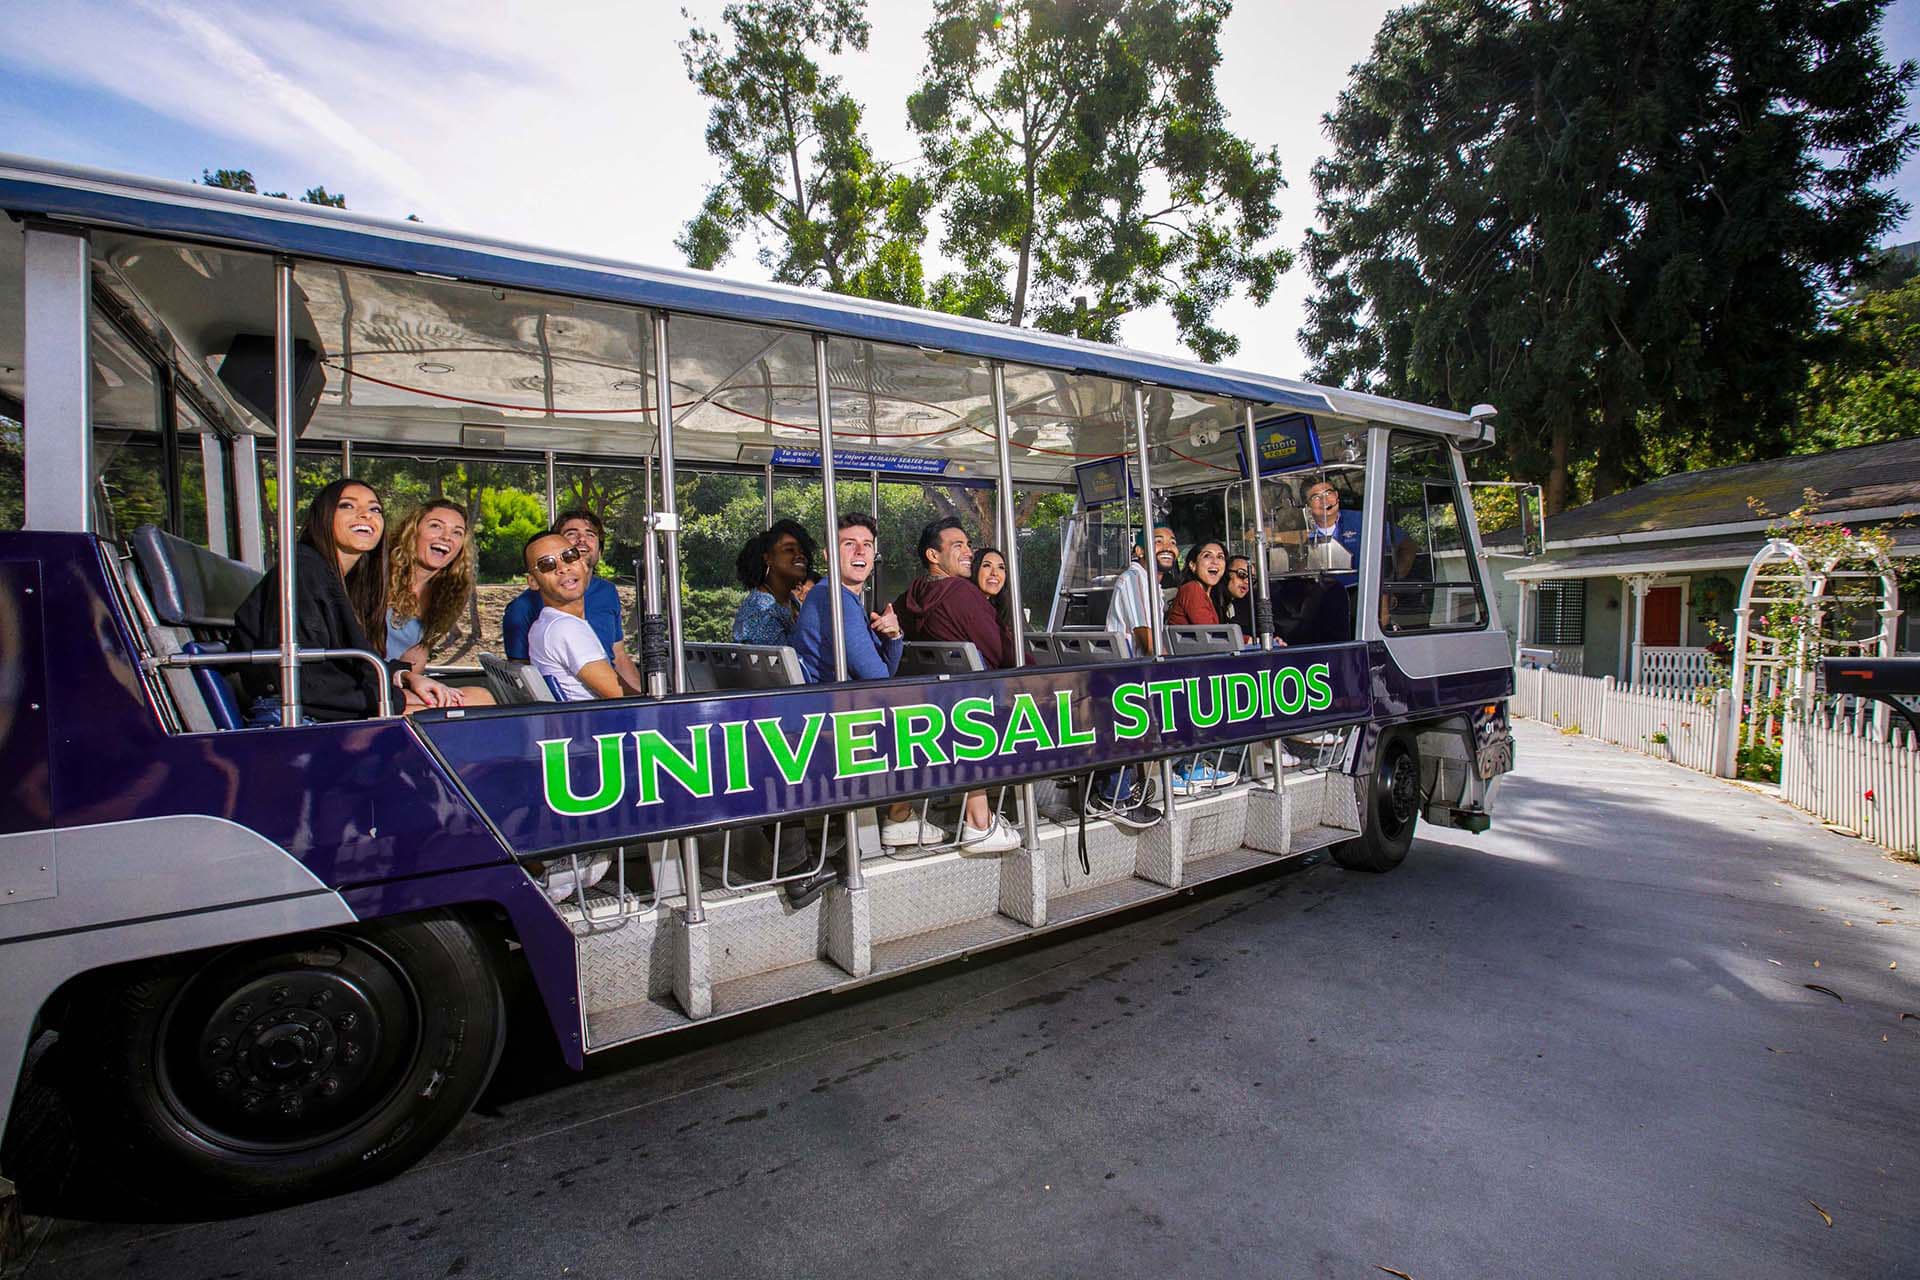 Universal Studios Hollywood Rolls Out First Four Electric Trams in its Fleet of 21 Studio Tour Trams